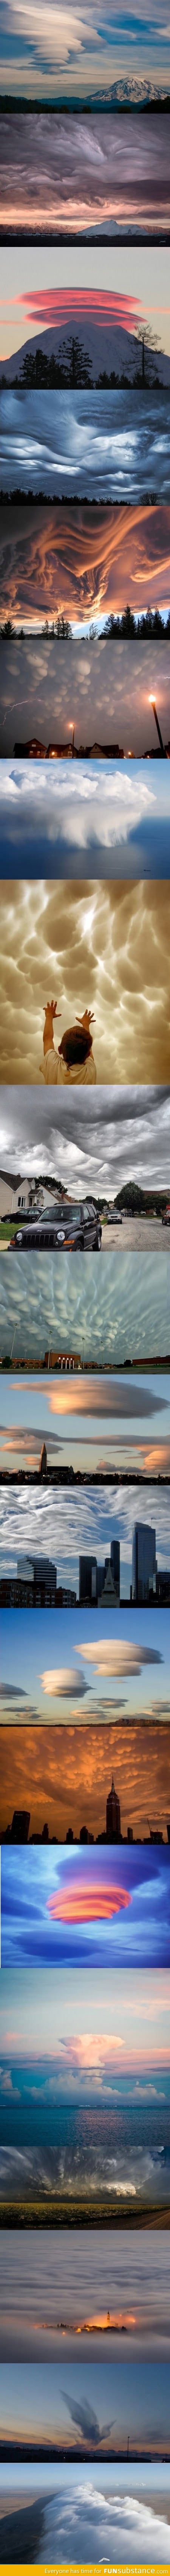 Spectacular cloud formations